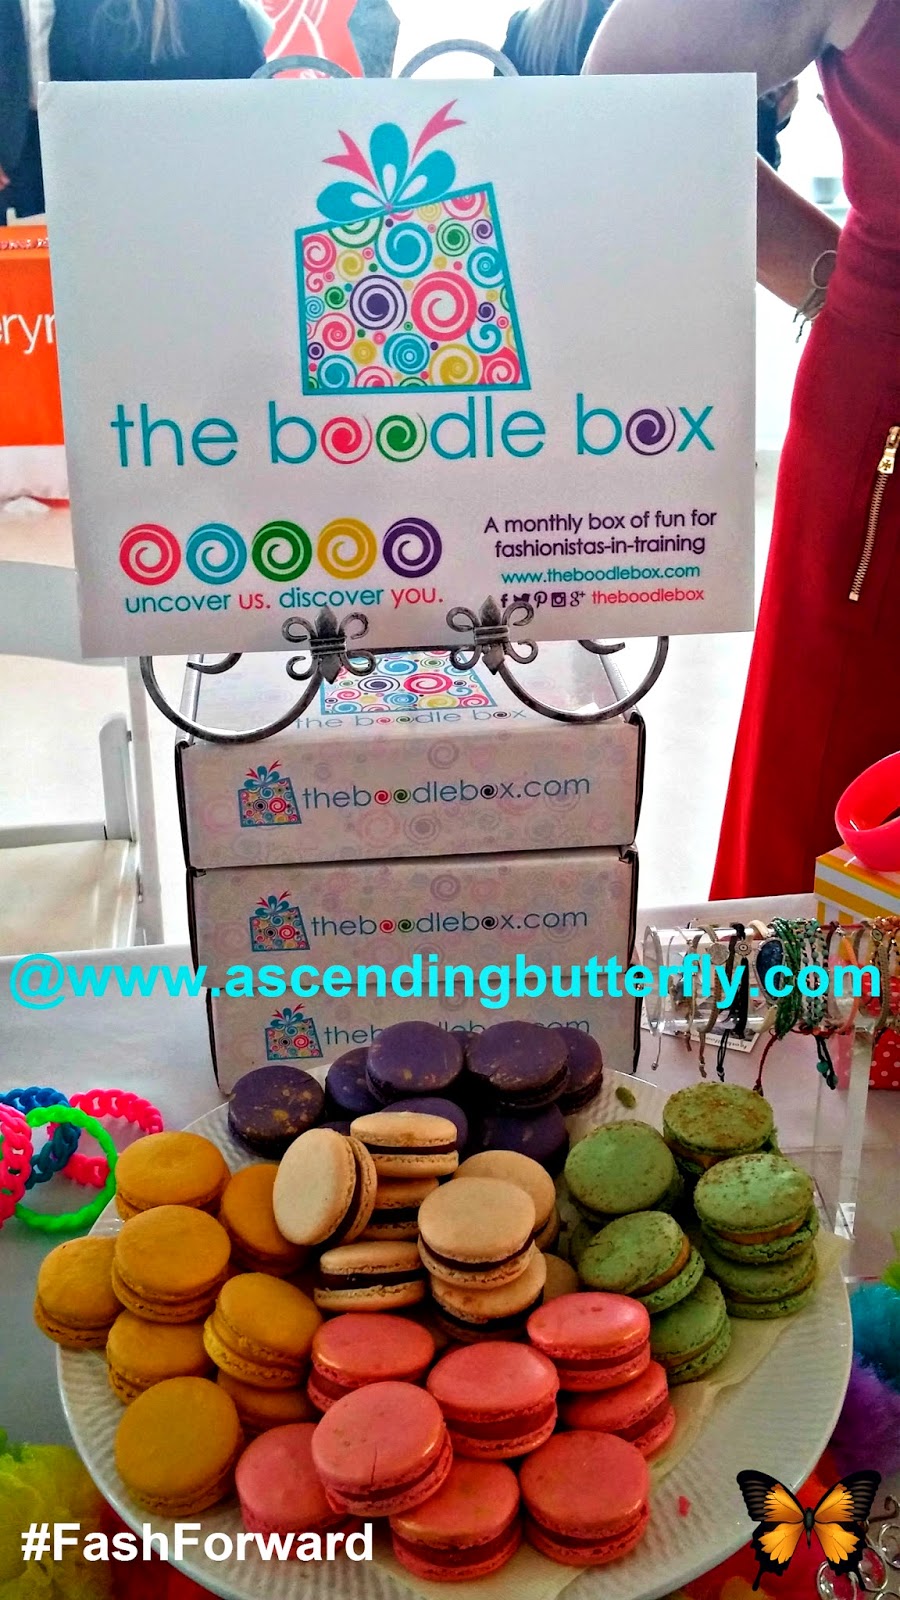 The Boodle Box - A monthly subscription service for 'fashionistas-in-training'